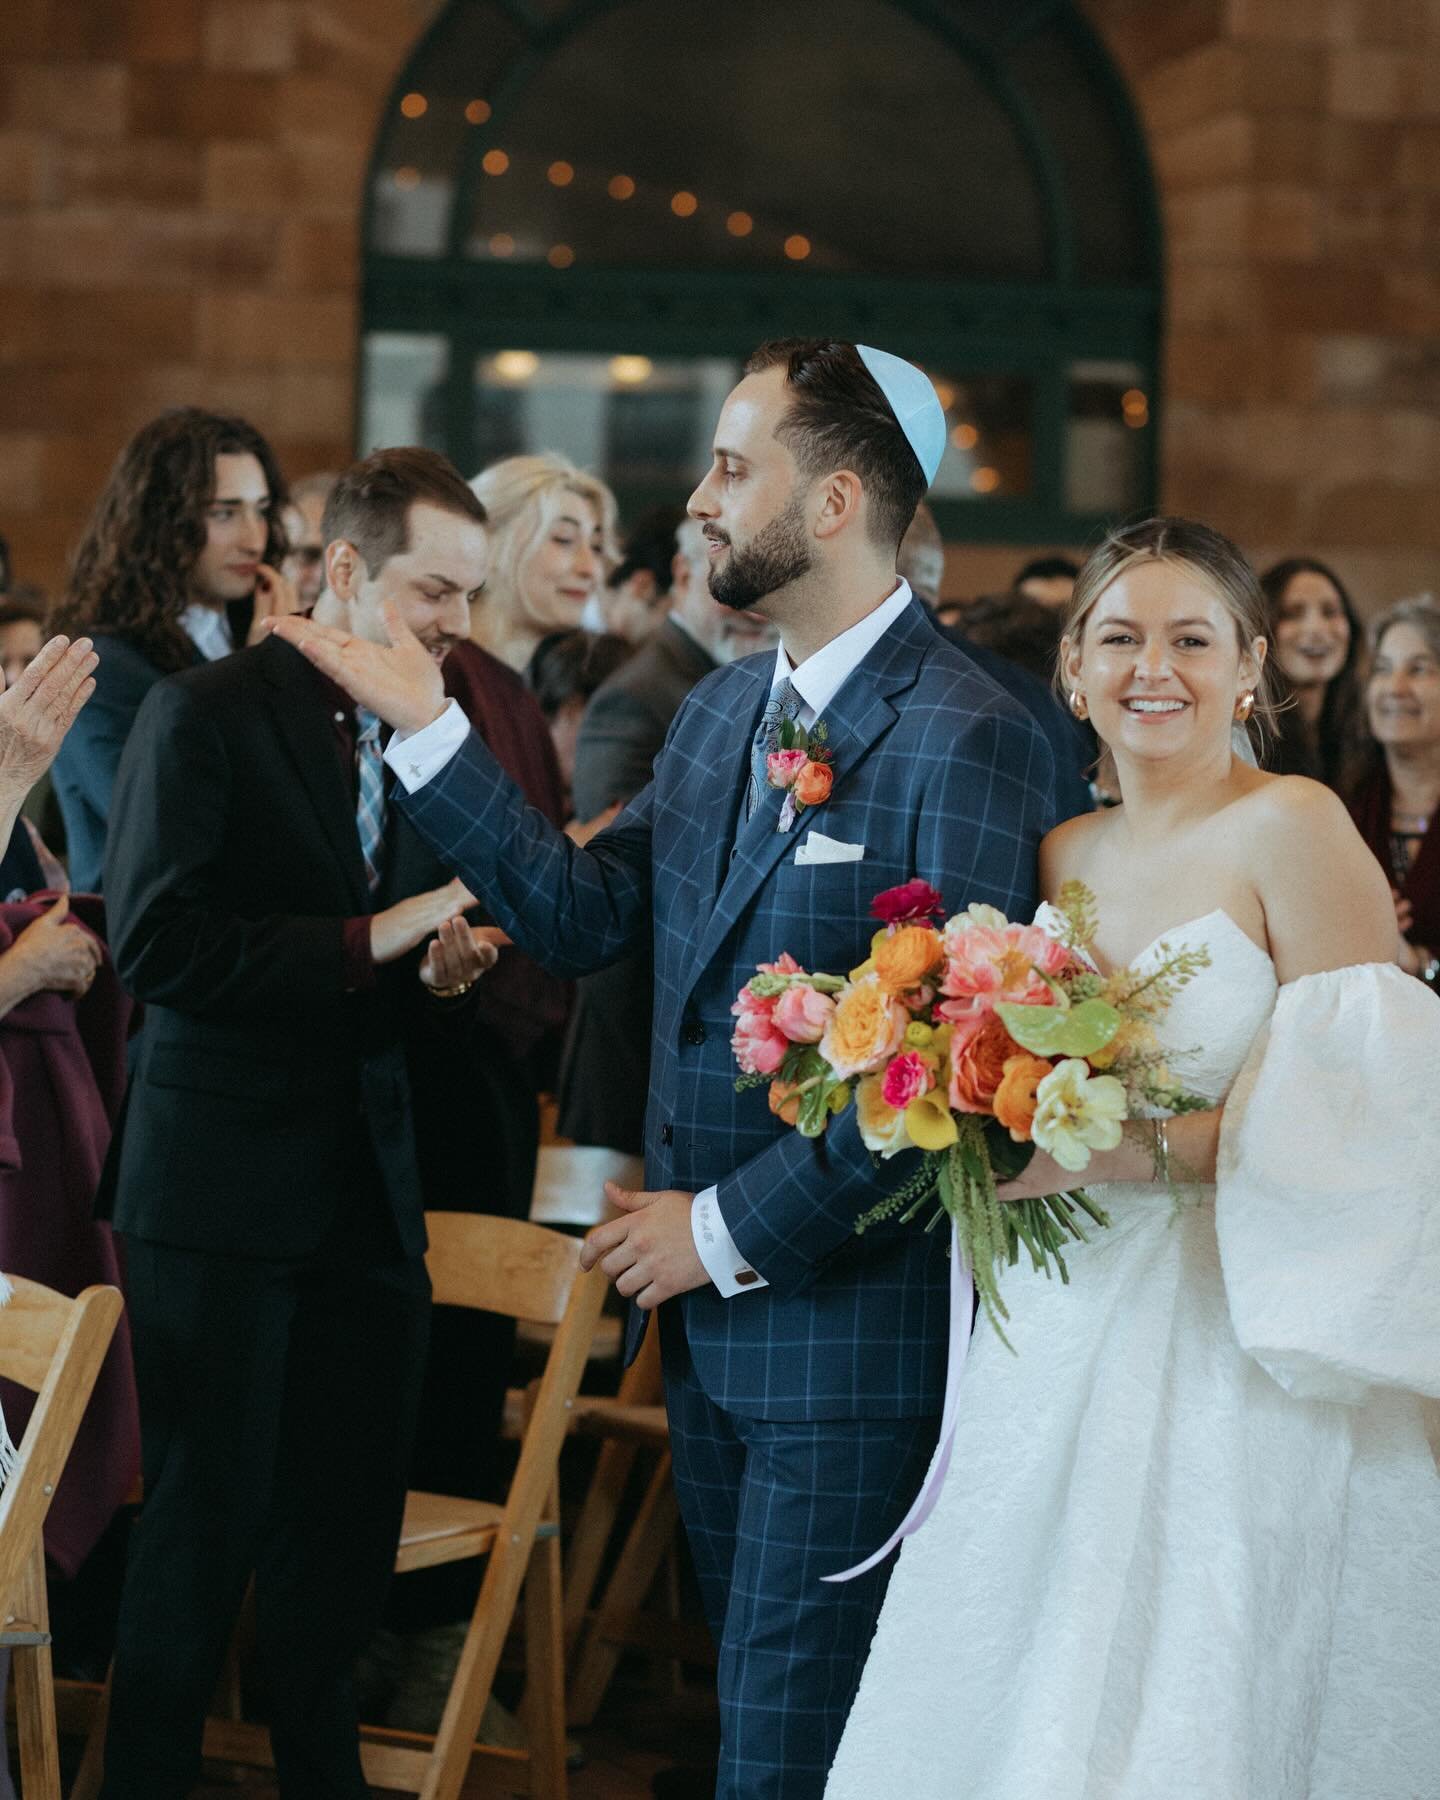 Erika and Gabe processed down the aisle together to this song and were met with cheers from their loved ones and that is just one reason why their wedding ceremony was one of my favorites of all time. 

Photos: @taylorsimonphoto 
Venue: @thepennsylva